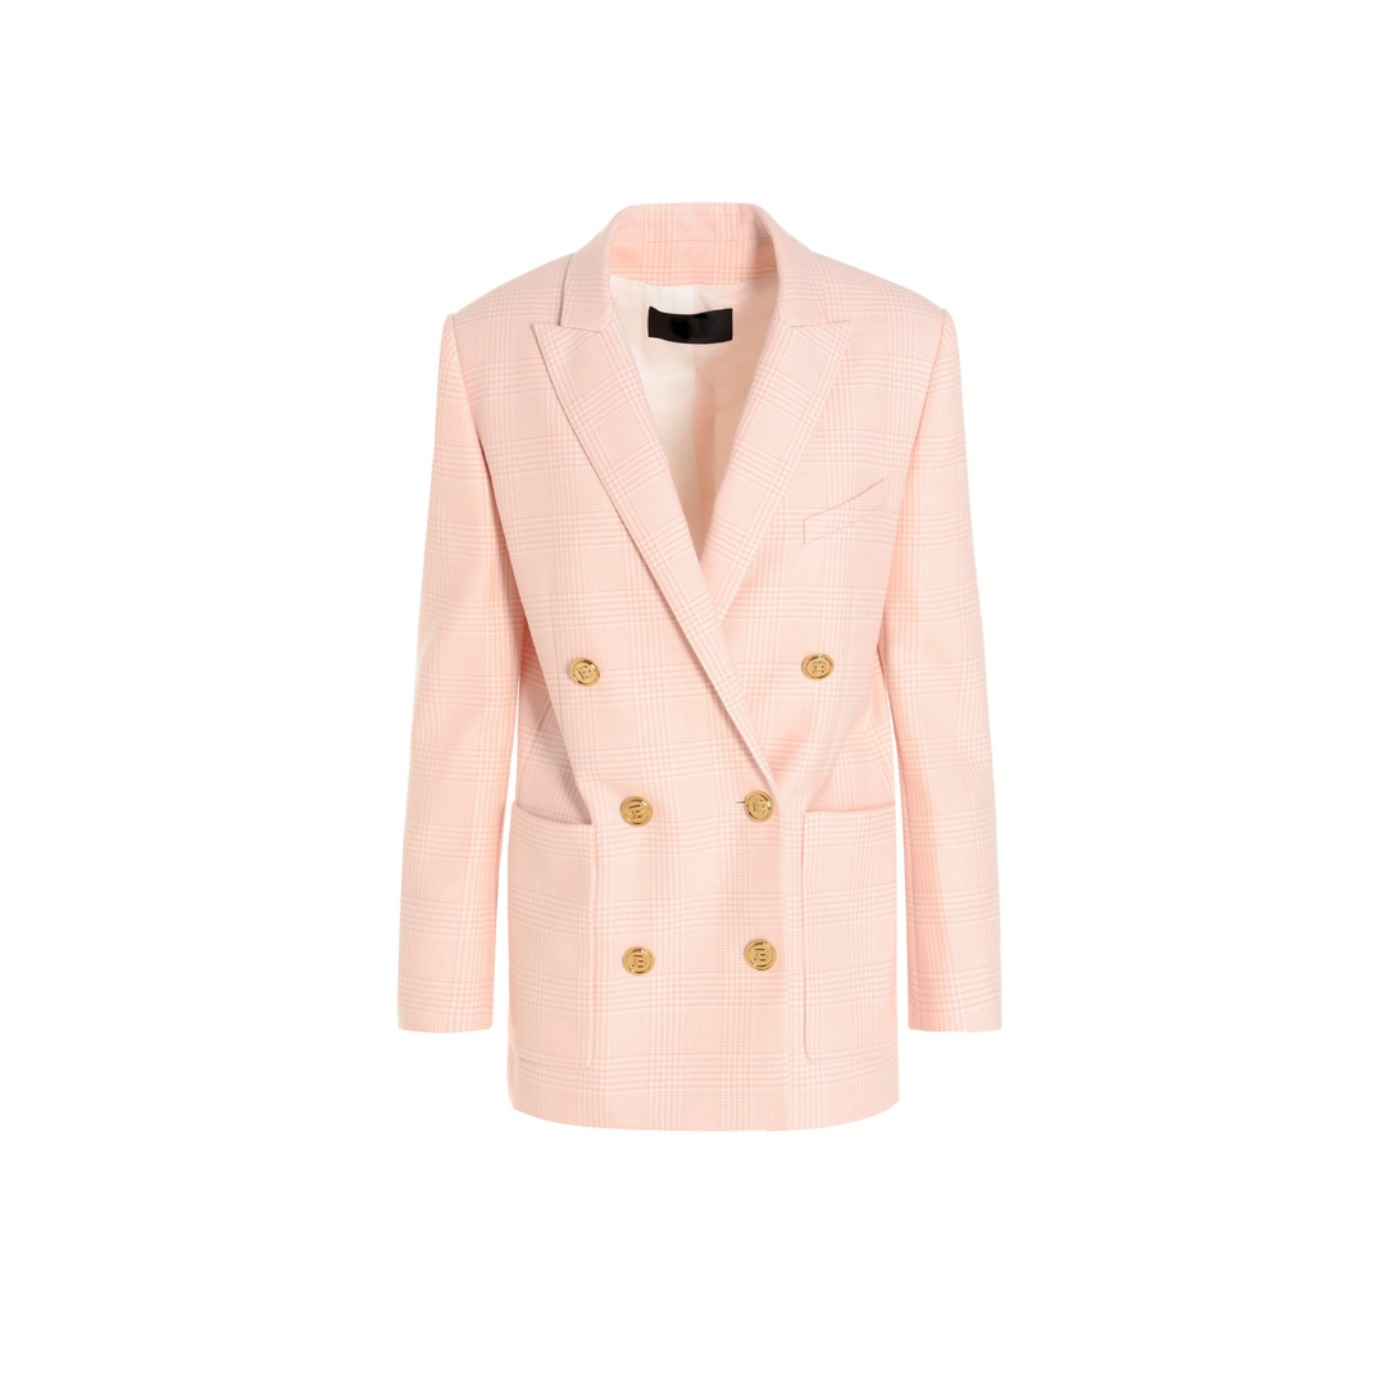 High quality double button pink blazer